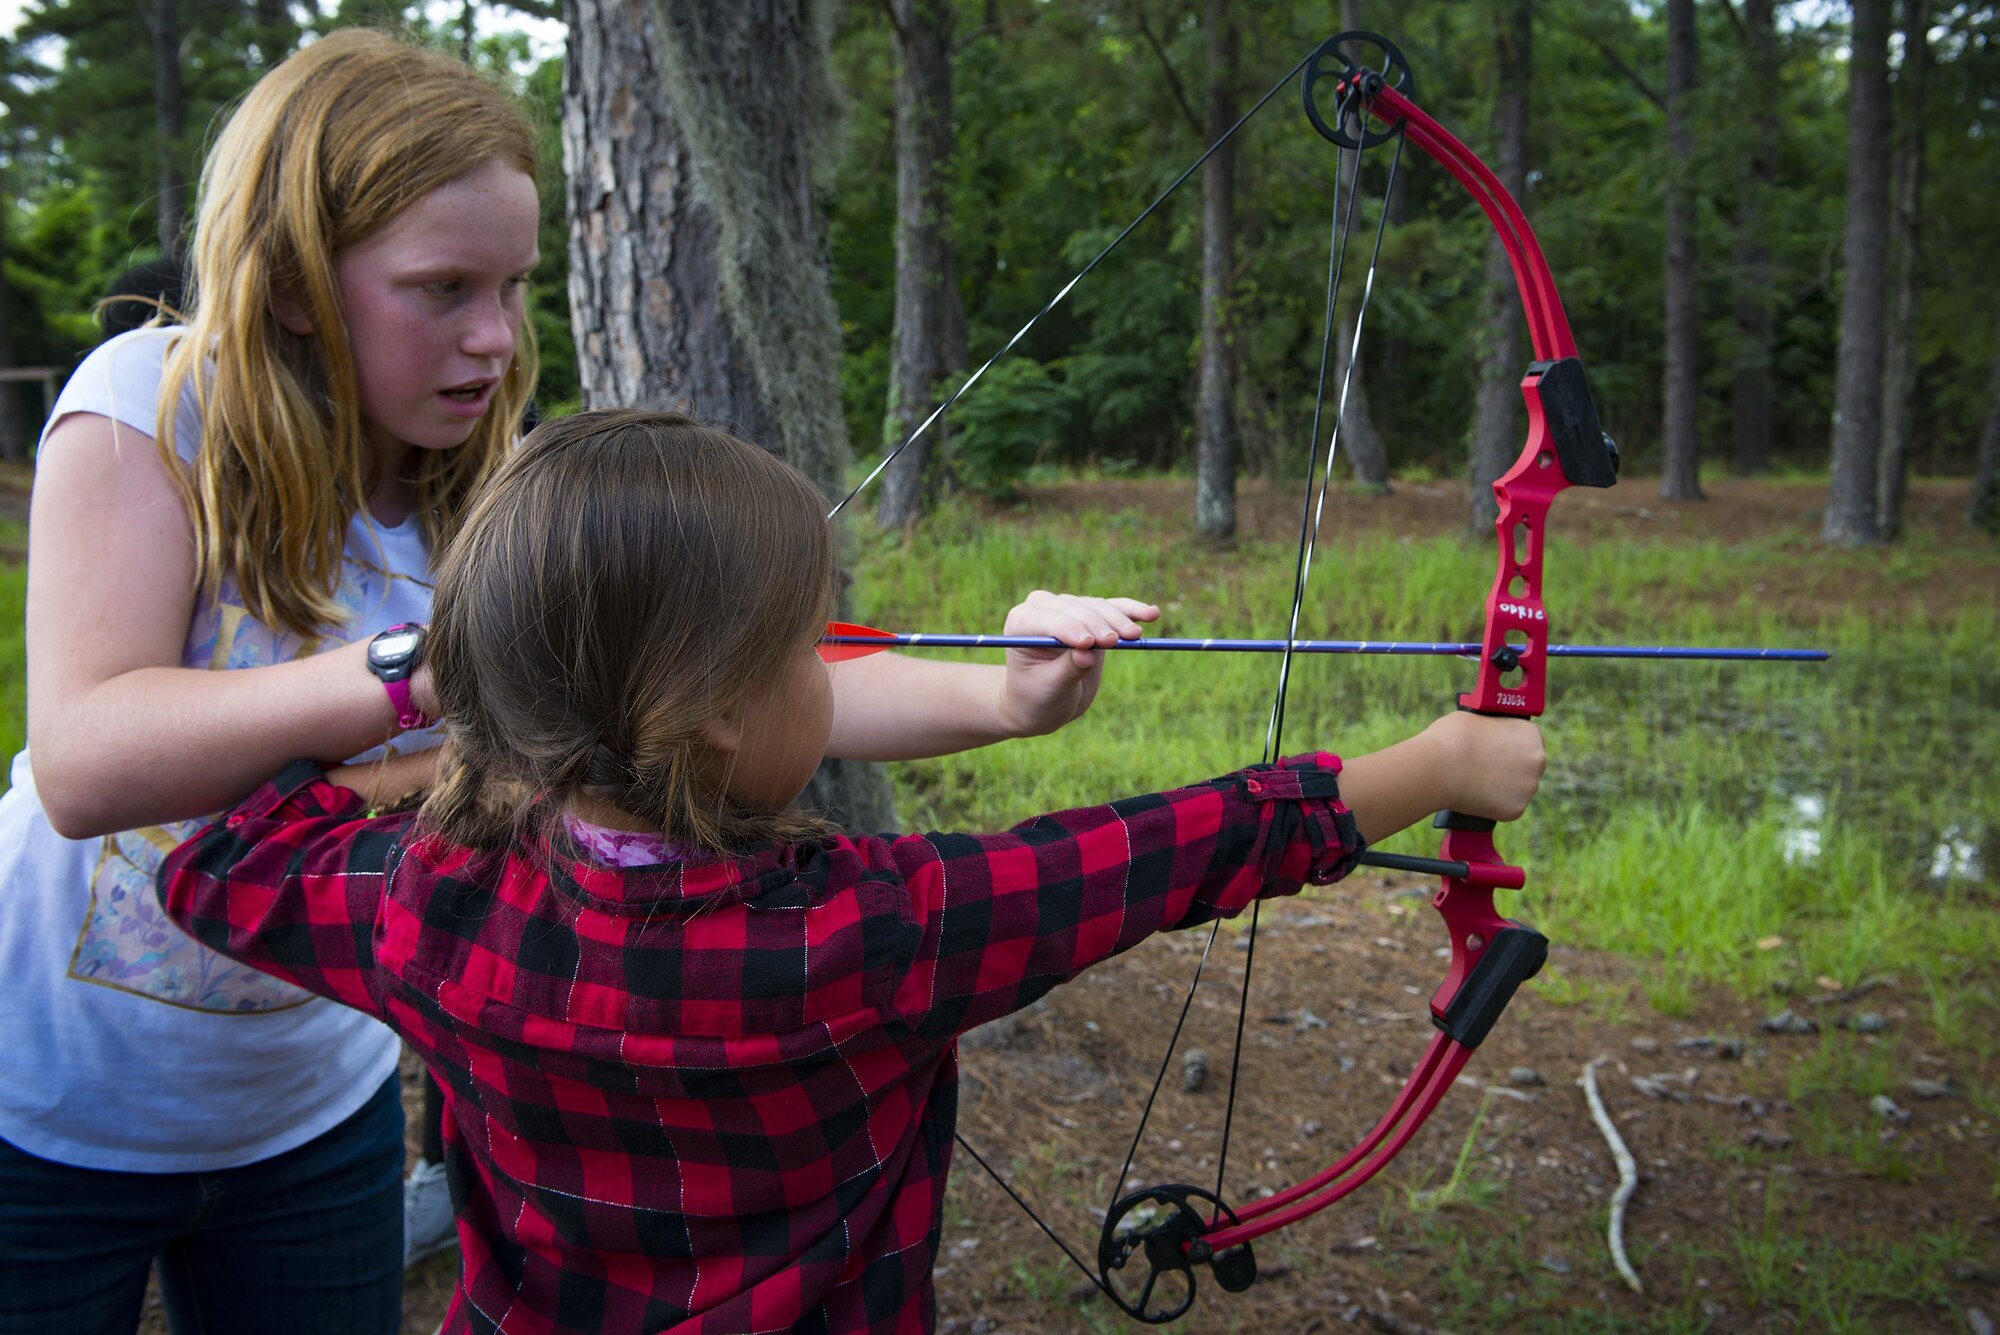 Emma, daughter of Senior Master Sgt. Anna Keck, 23d Communications Squadron superintendent, gives Kairi, daughter of Tech. Sgt. Anthony Guevara, some final advise before she fires her bow at the archery range during Olympic Week, June 14, 2017, at Moody Air Force Base, Ga. Archery was part of the Youth Center’s annual Olympic Week, with the goal of promoting unity and healthy lifestyles. (U.S. Air Force Photo by Airman 1st Class Erick Requadt) 